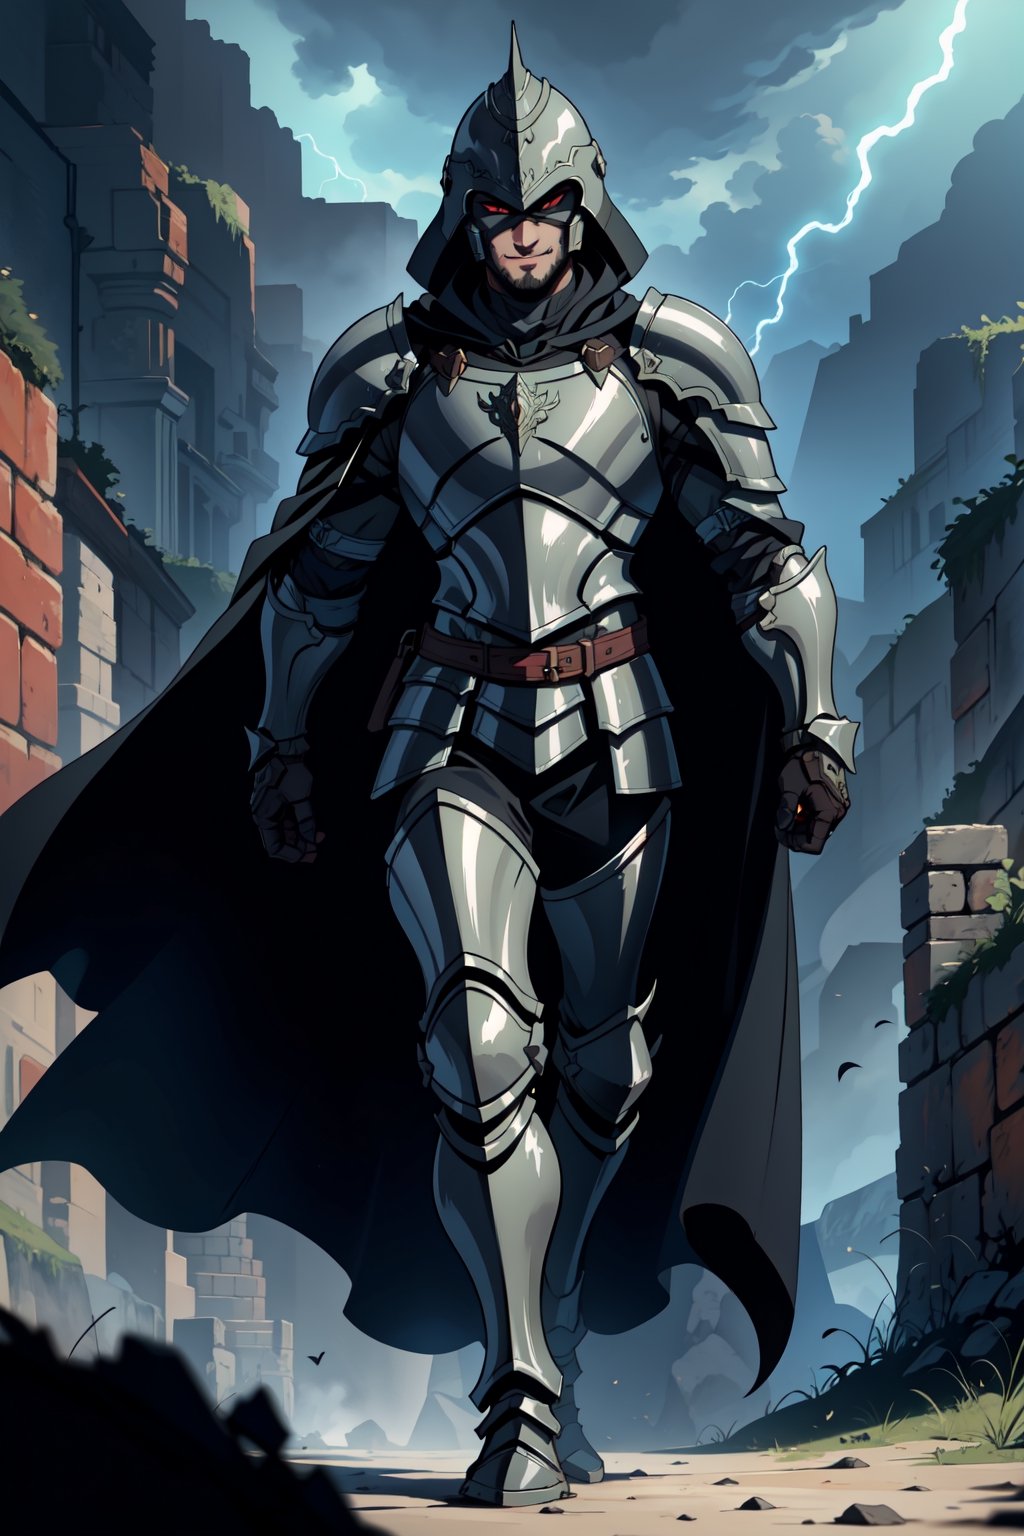 Very villanous and badass dark knight, wildly smile, brown short hair. He wears a very black badass battle armor (heavy plate armor, heavy metal shoulder pad, metal boots, badass cape, badass helmet covering the entire face). Beautiful skin. Beautitul and detailed eyes. red eyes. His eyes shine, his hair looks nice and shines too. he's walking in medieval castle. day with electrical storm. day. Masculine appearance, villanus